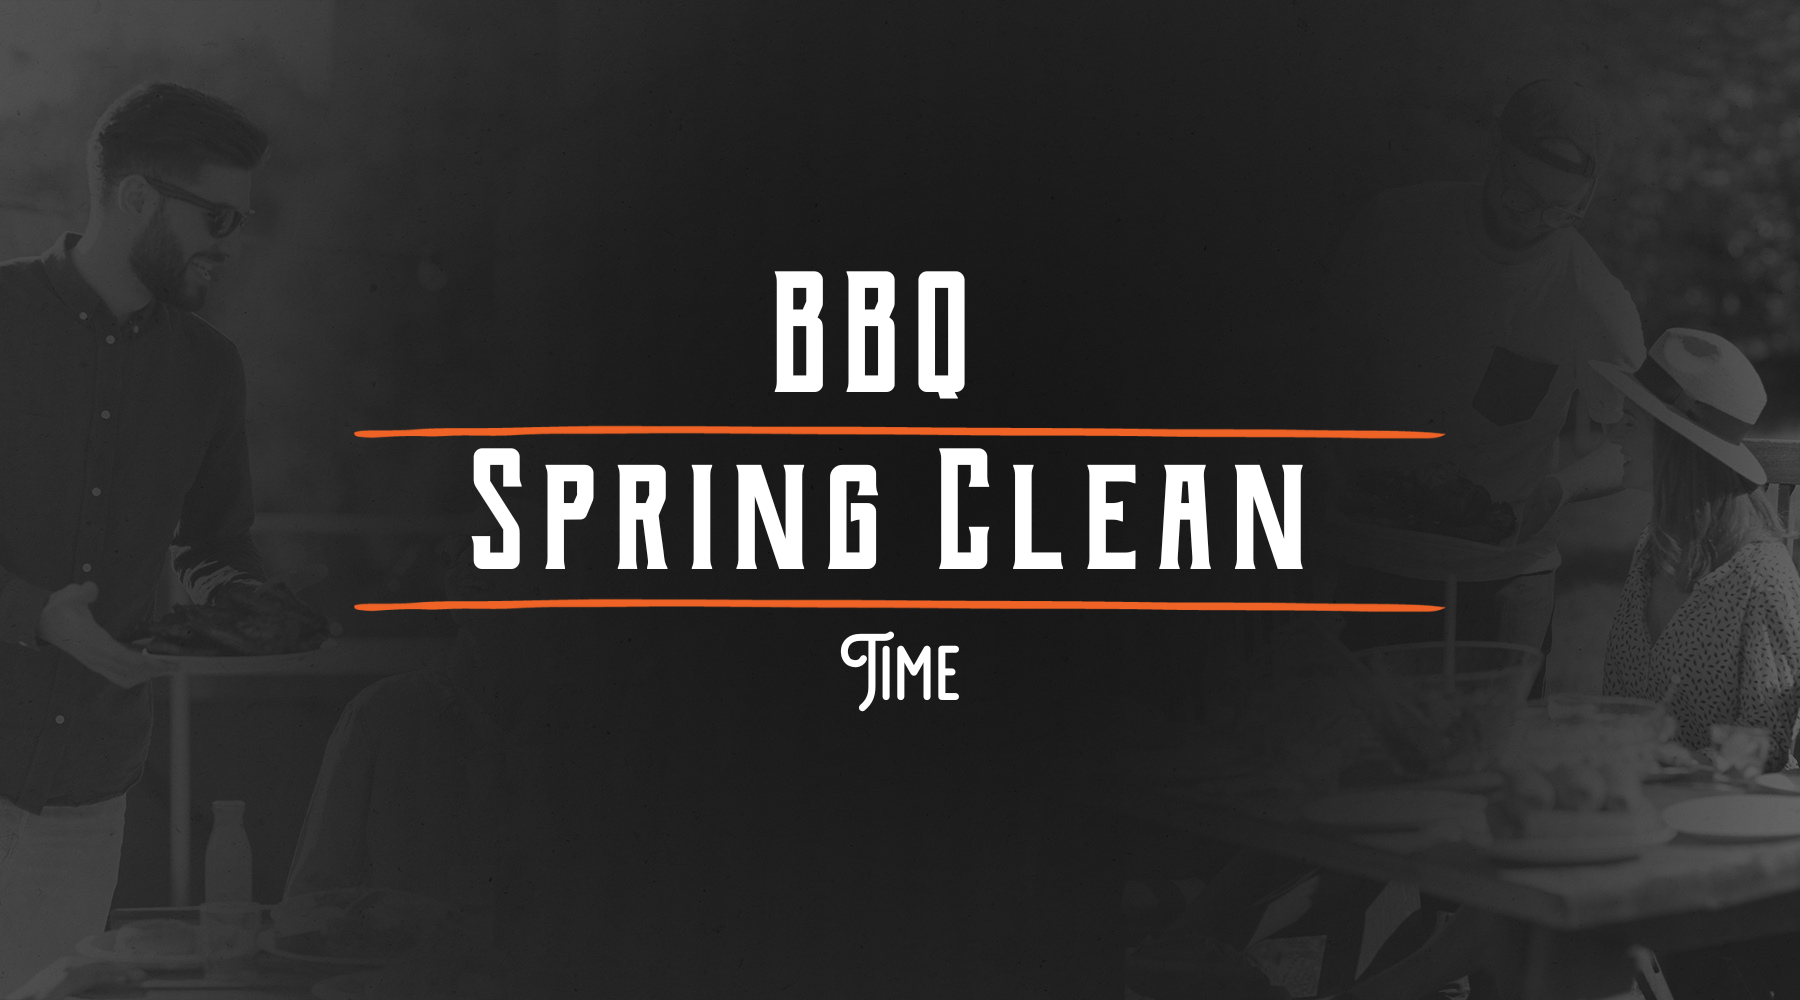 BBQ Spring Clean Time